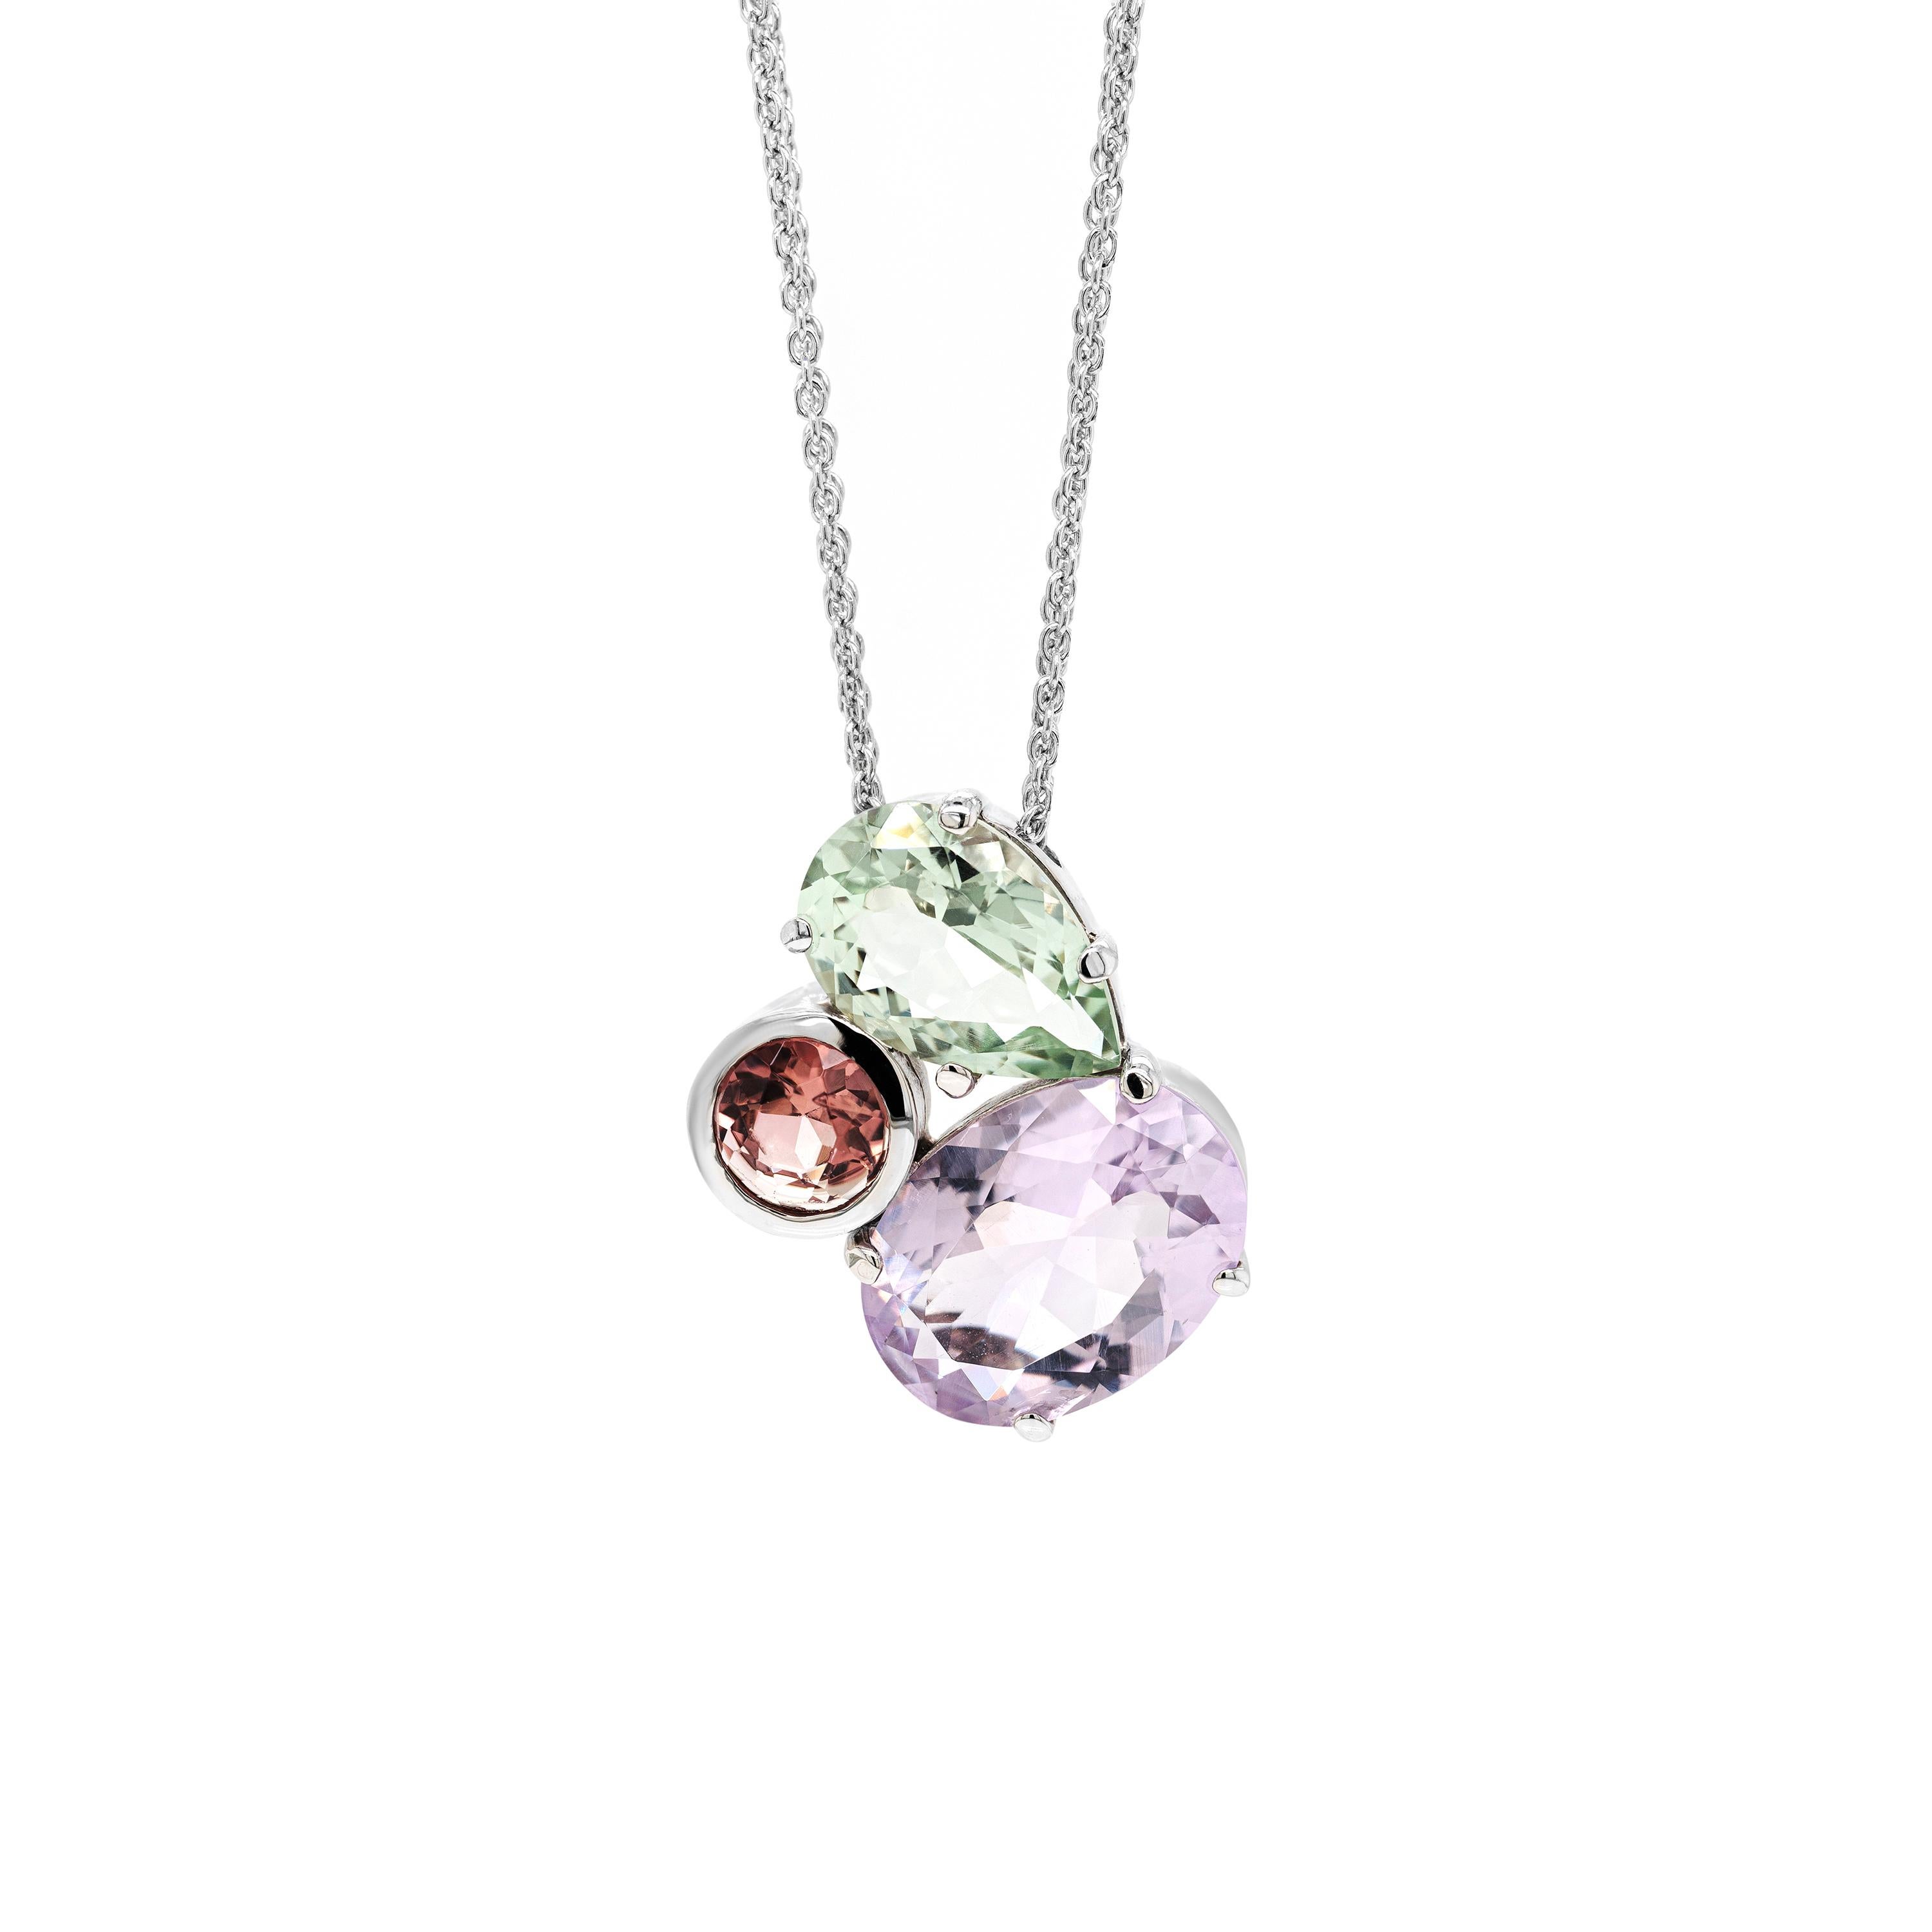 Meticulously crafted and set with a variety of stone shapes and colours, this beautiful 18 carat white gold set consists of a pendant necklace and matching earrings.
The colourful pendant is beautifully adorned with a 12x8.3mm pear shaped green